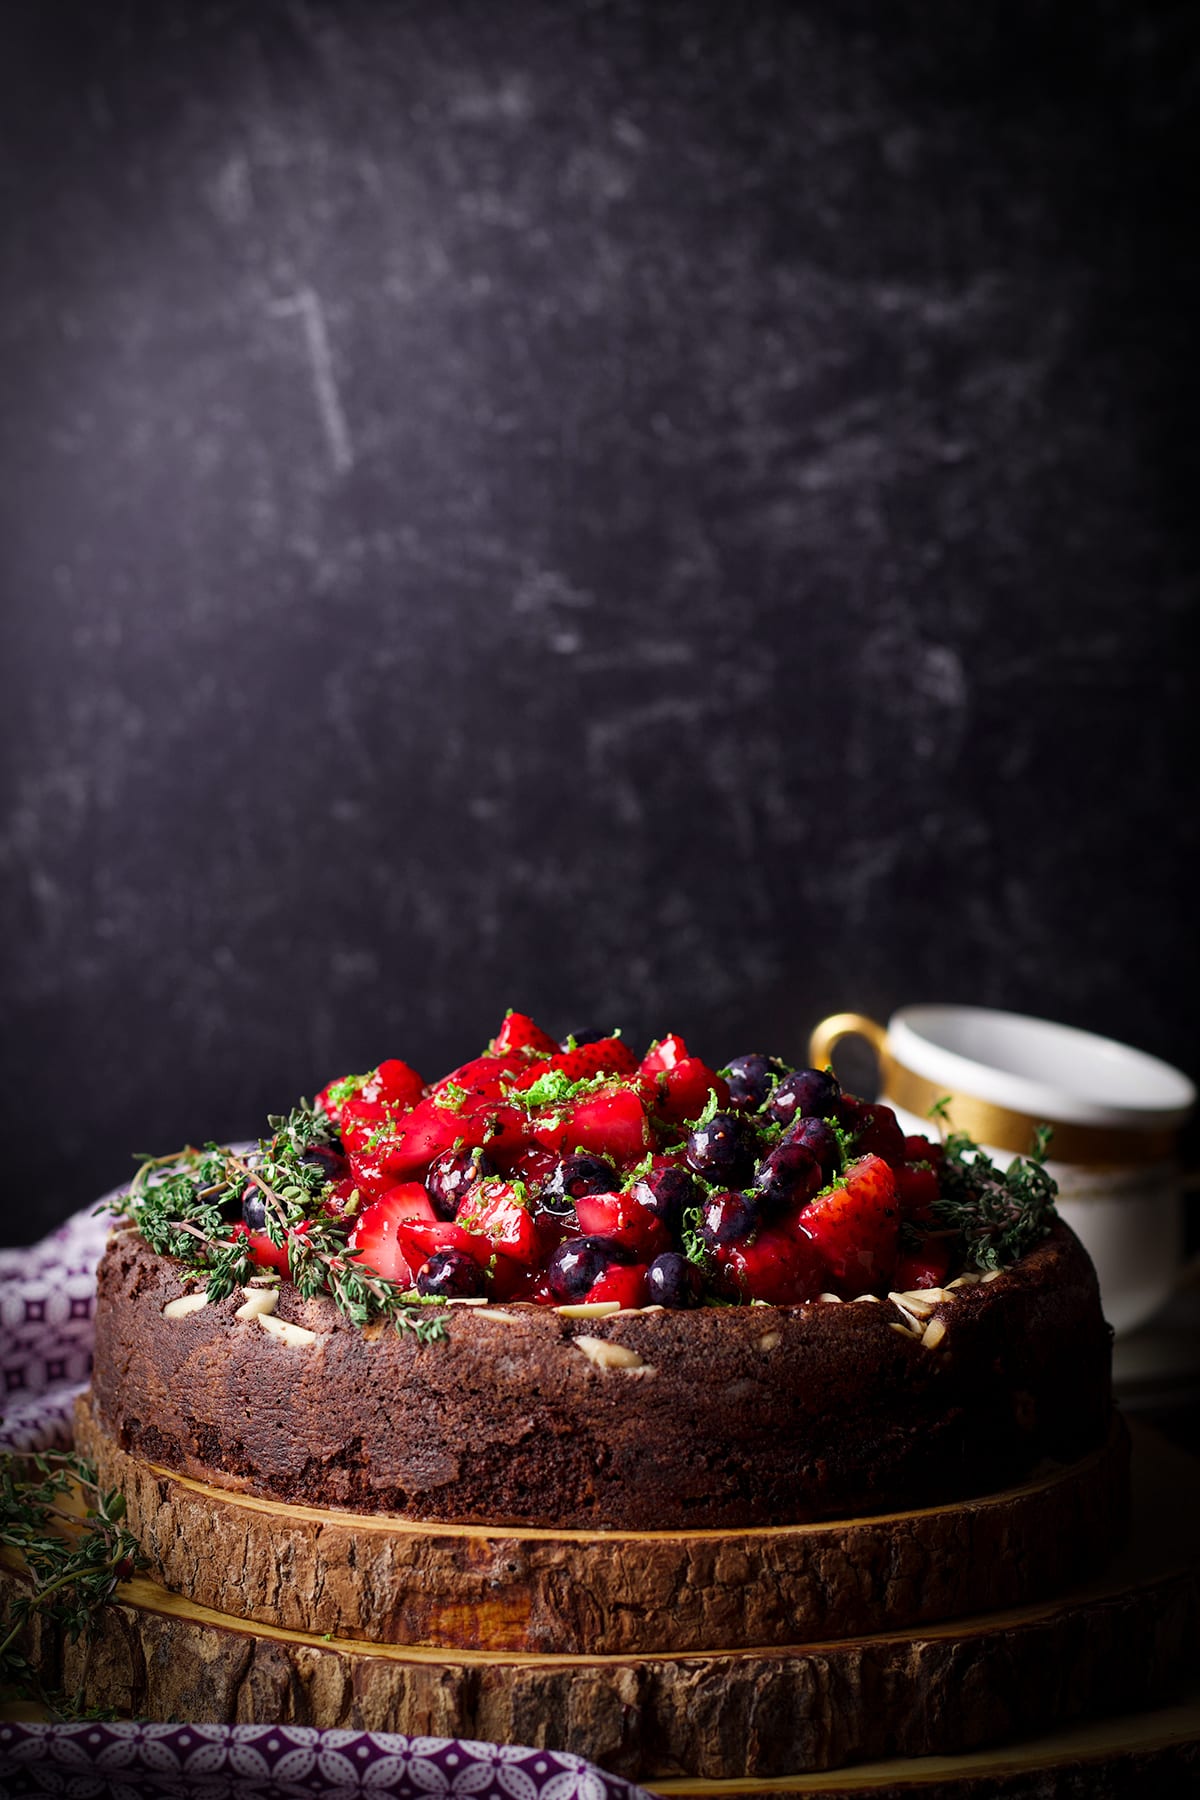 A chocolate ricotta cake made with almond flour covered in fresh berry sauce.